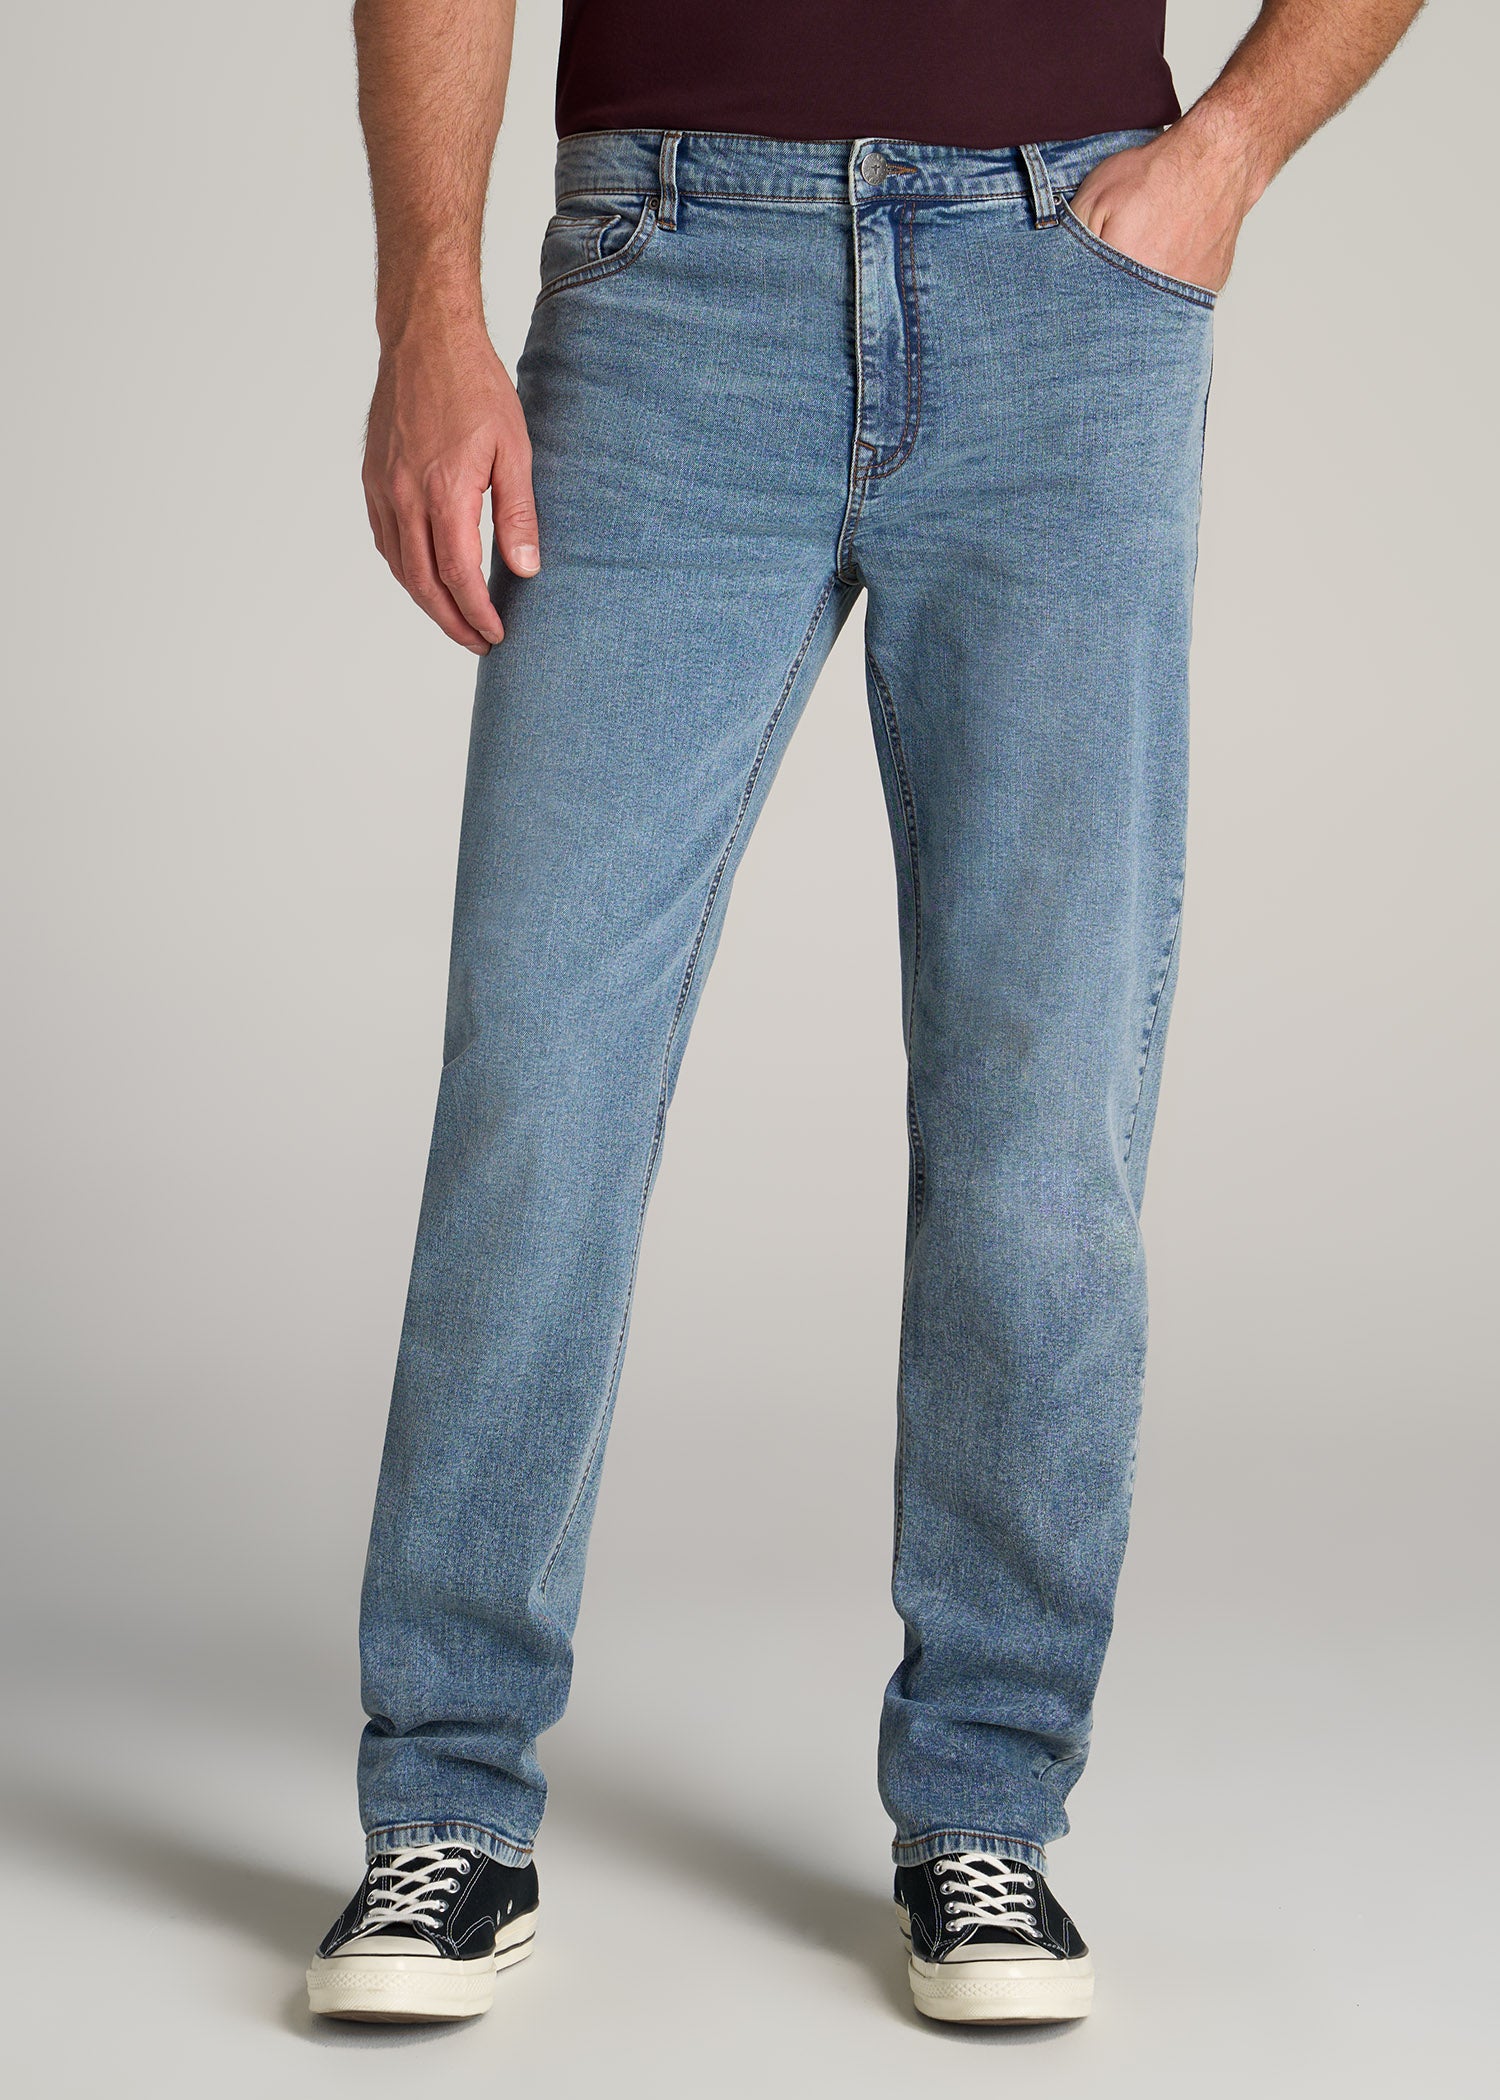       American-Tall-Men-J1-Jeans-Faded-Blue-front